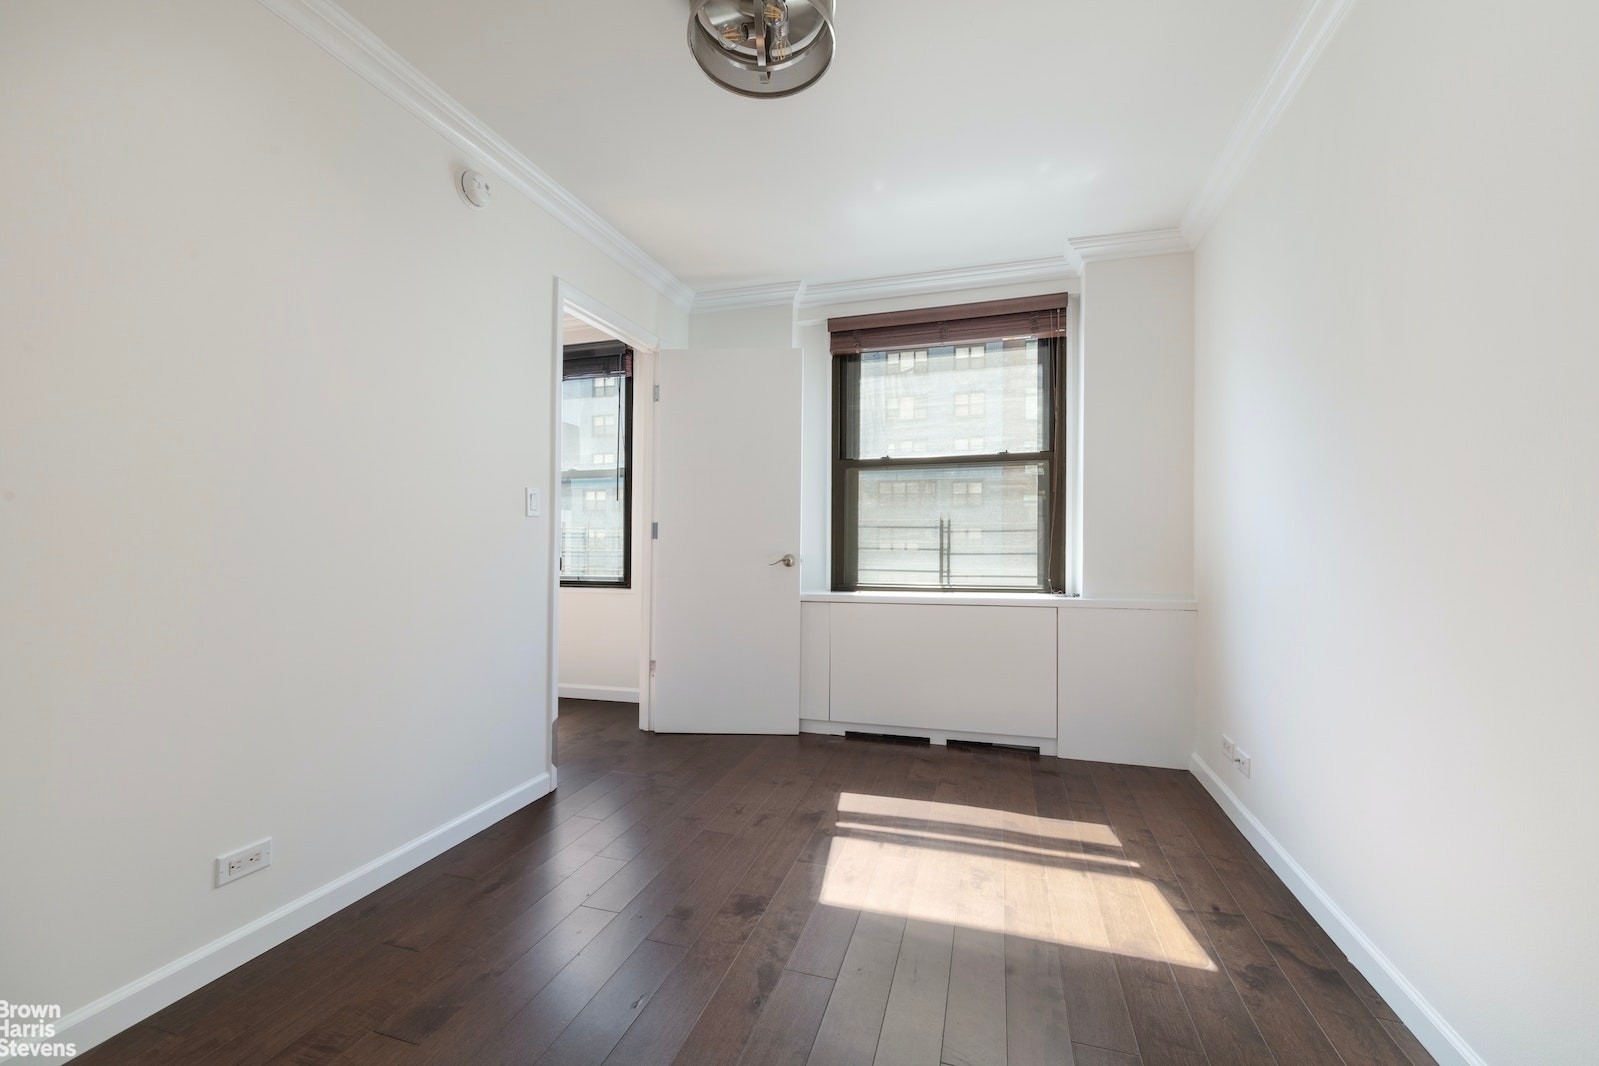 8. Co-op Properties for Sale at Harridge House, 225 E 57TH ST, 14F Midtown East, New York, New York 10022